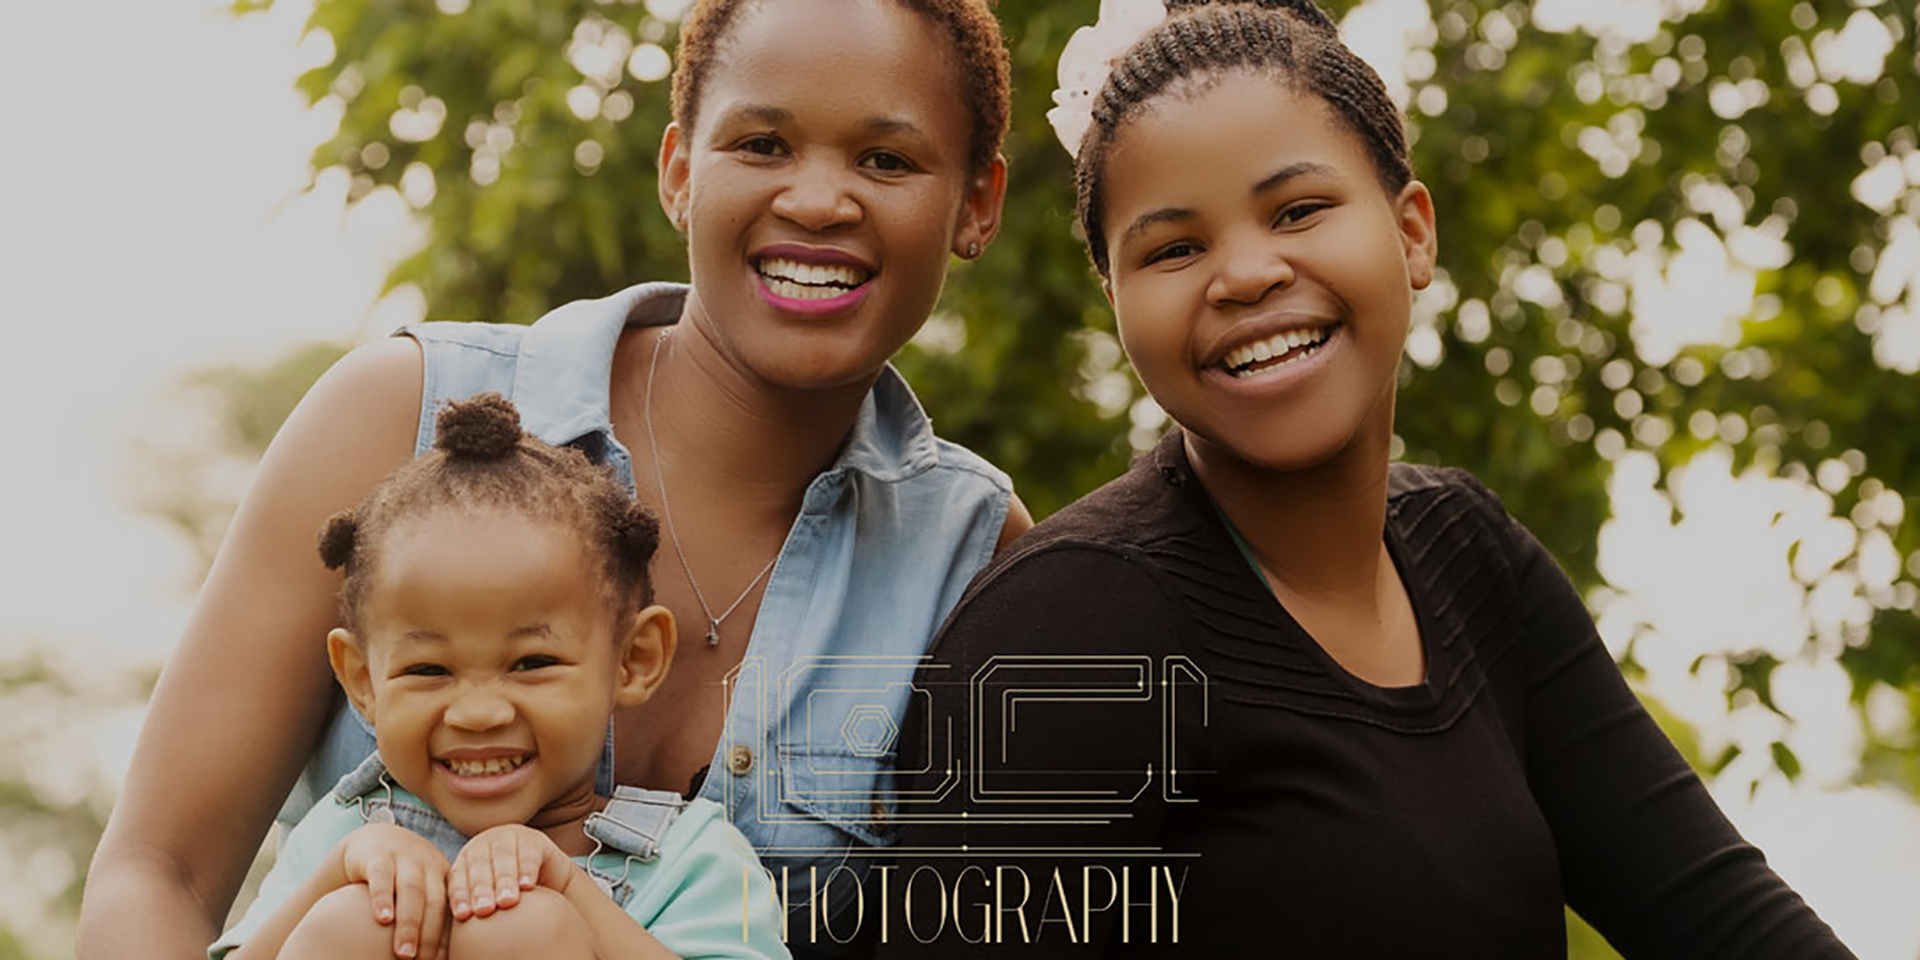 Header Image for blog about Family photography on location at the Pretoria Botanical Gardens by Loci Photography